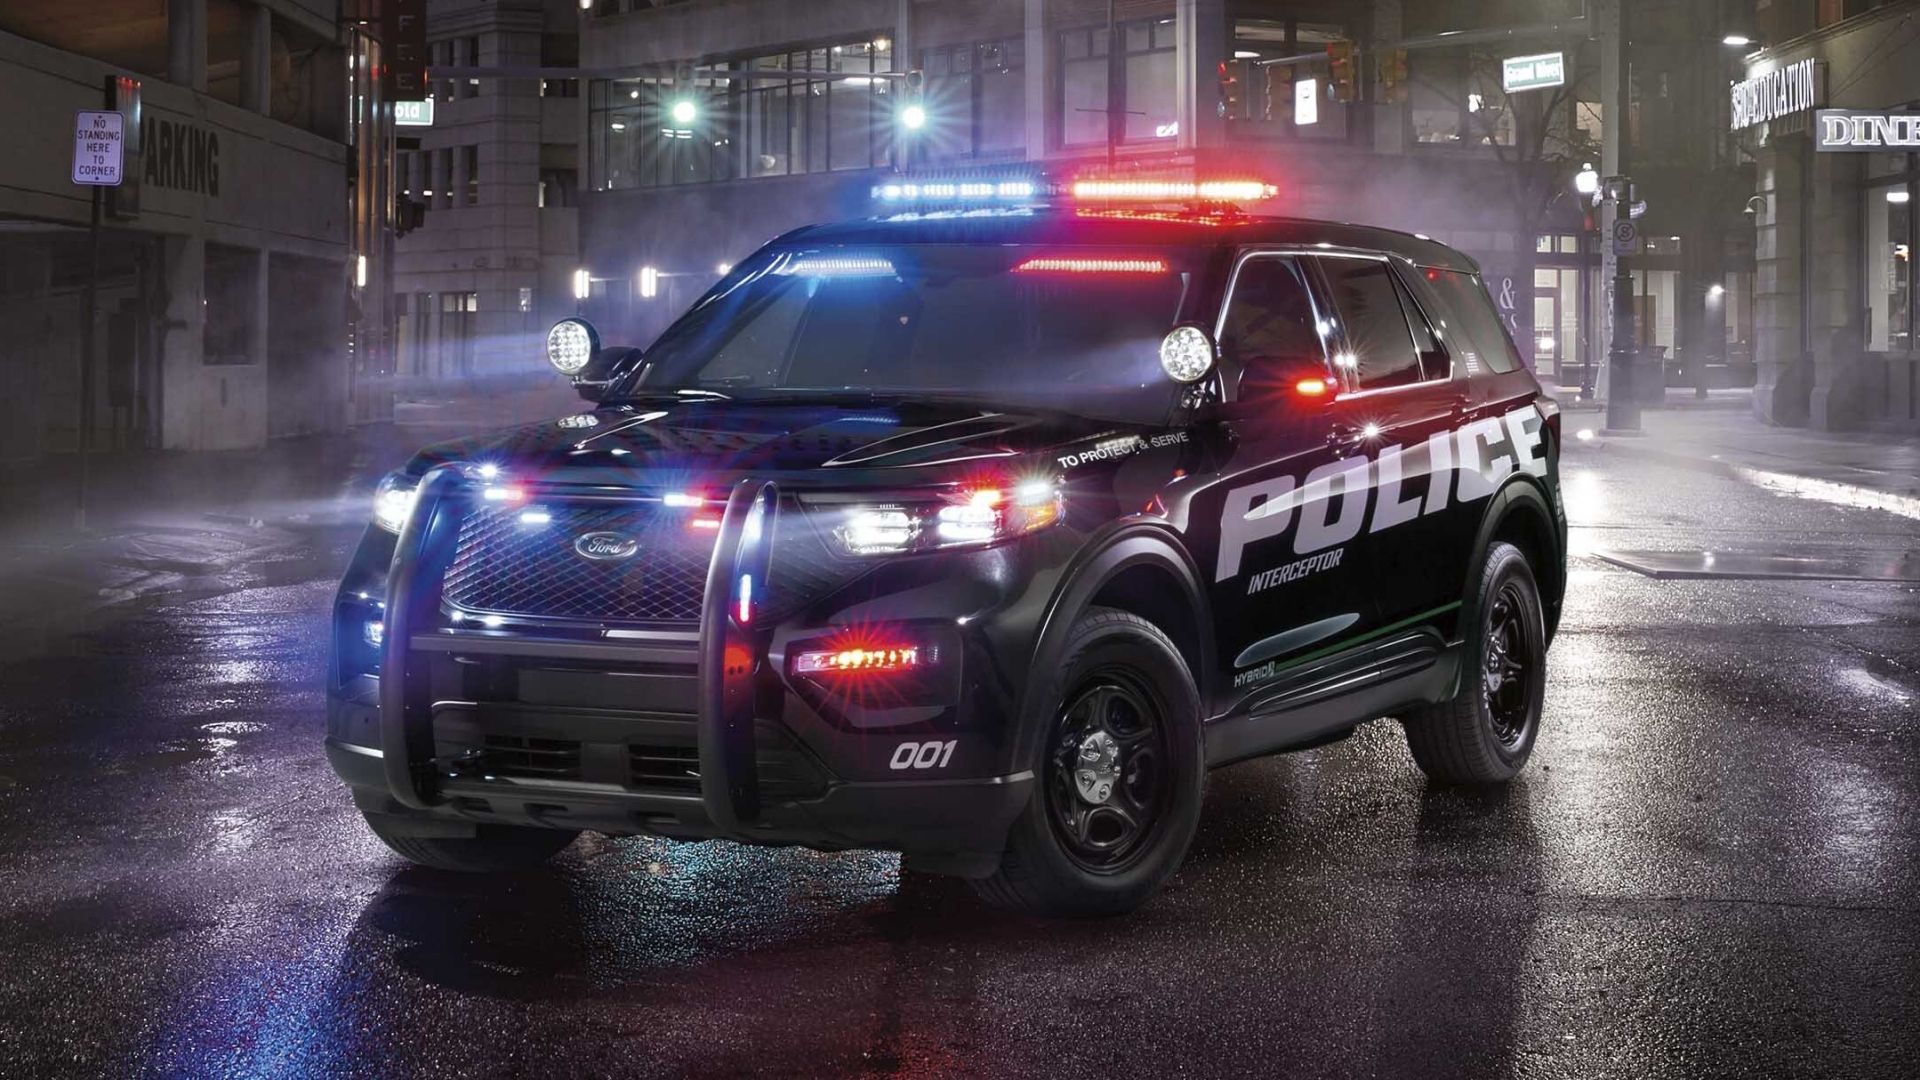 Modern Police Cars and Technology